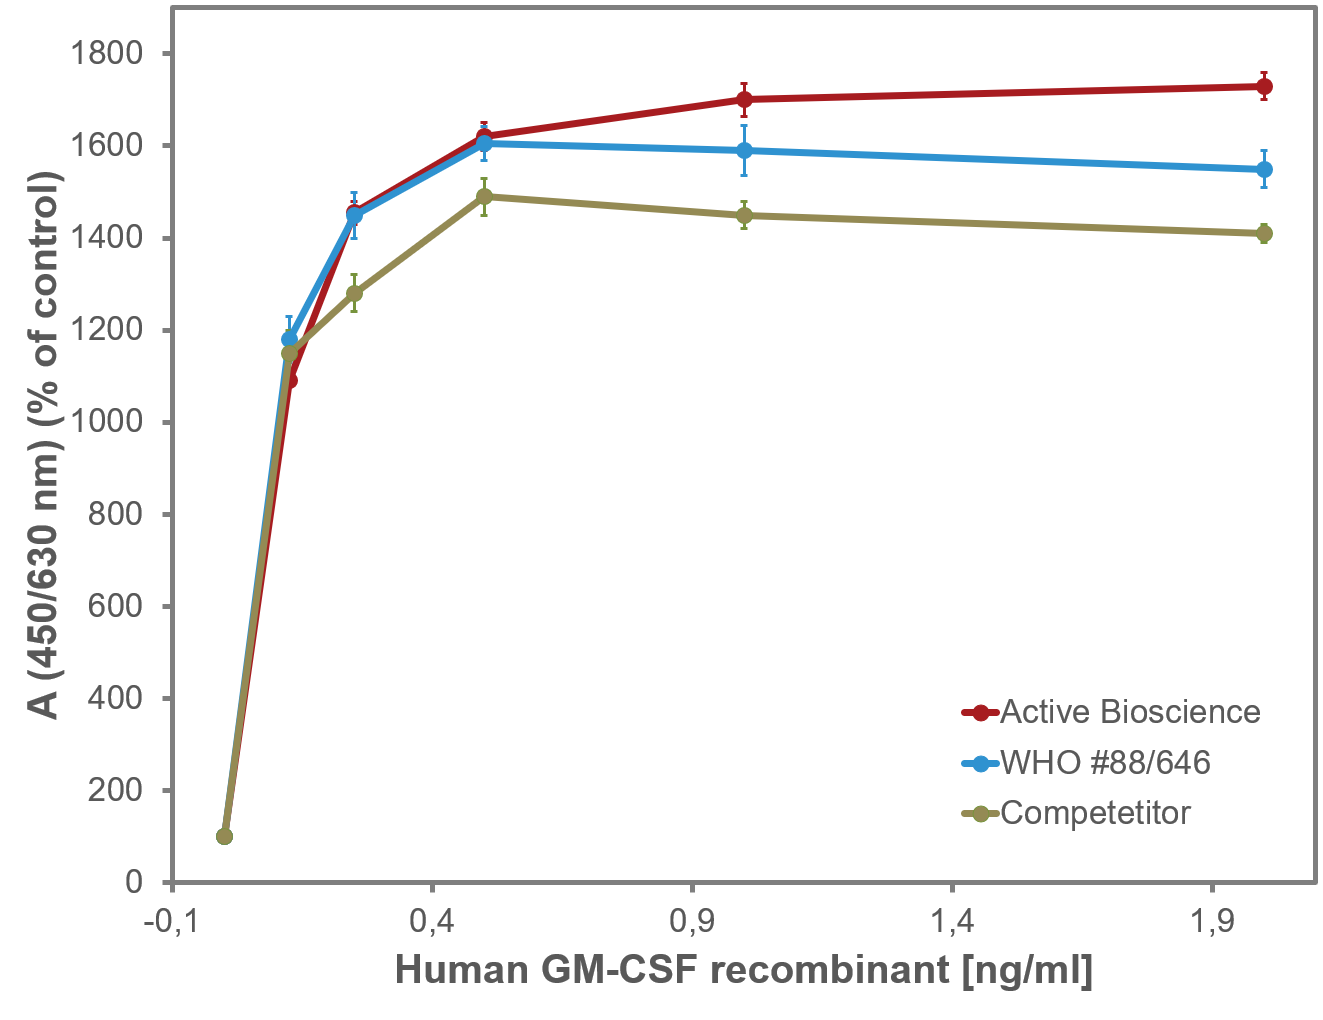 Dose-dependent stimulation of cell proliferation in TF-1 cells by recombinant human GM-CSF and the WHO standard 88/646. Values are the means (�SD) of triplicate determinations and expressed as percentage of control.